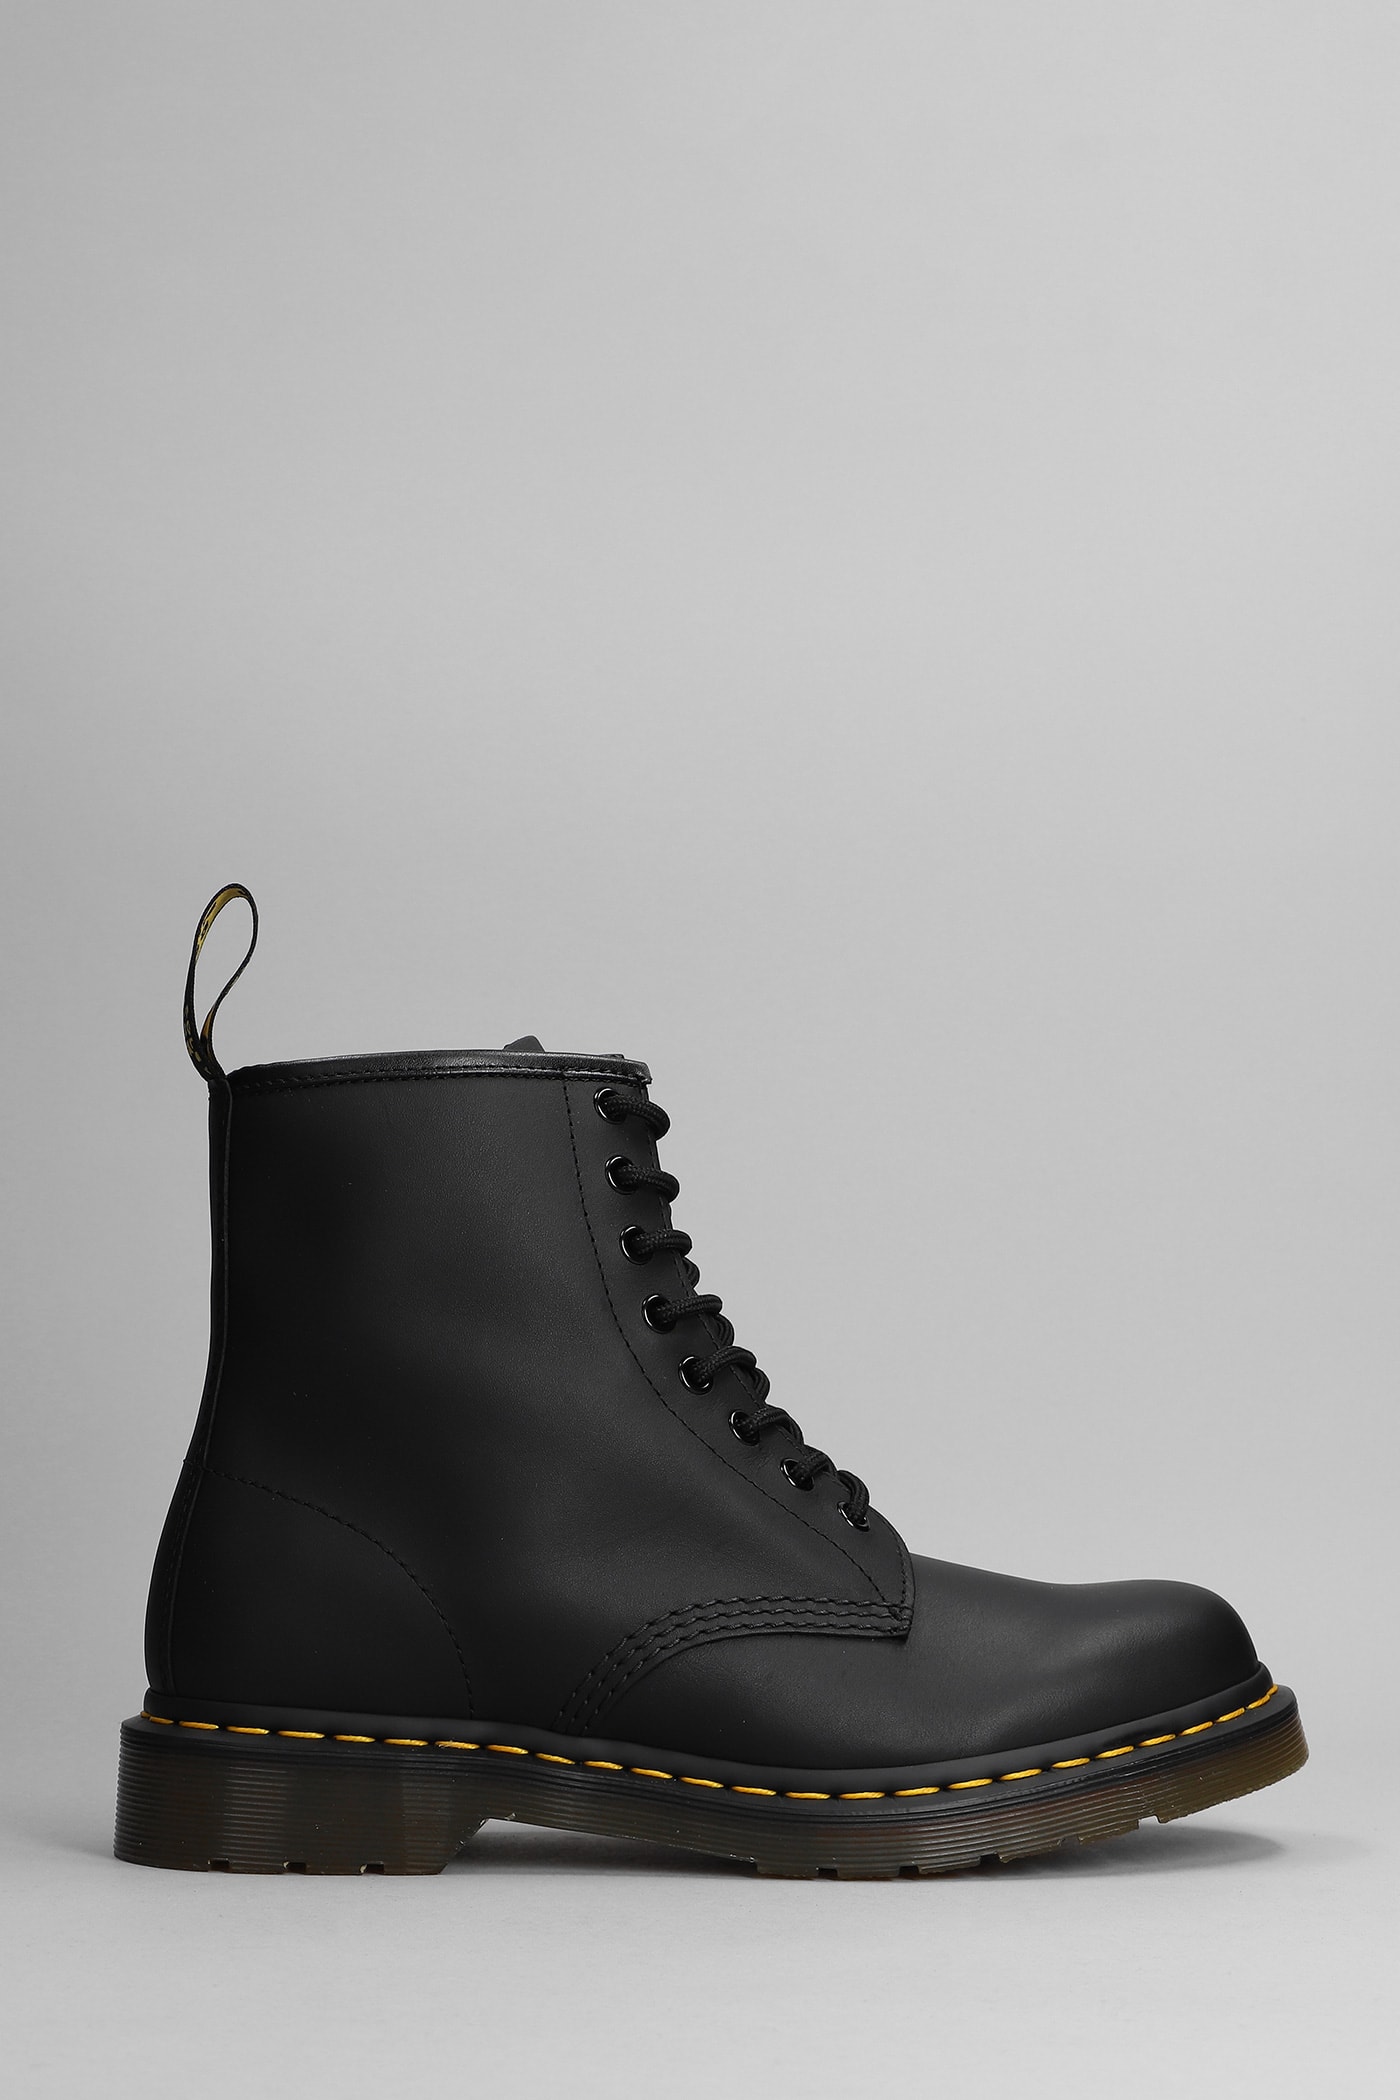 Dr. Martens 1460 Greasy Combat Boots In Black Leather